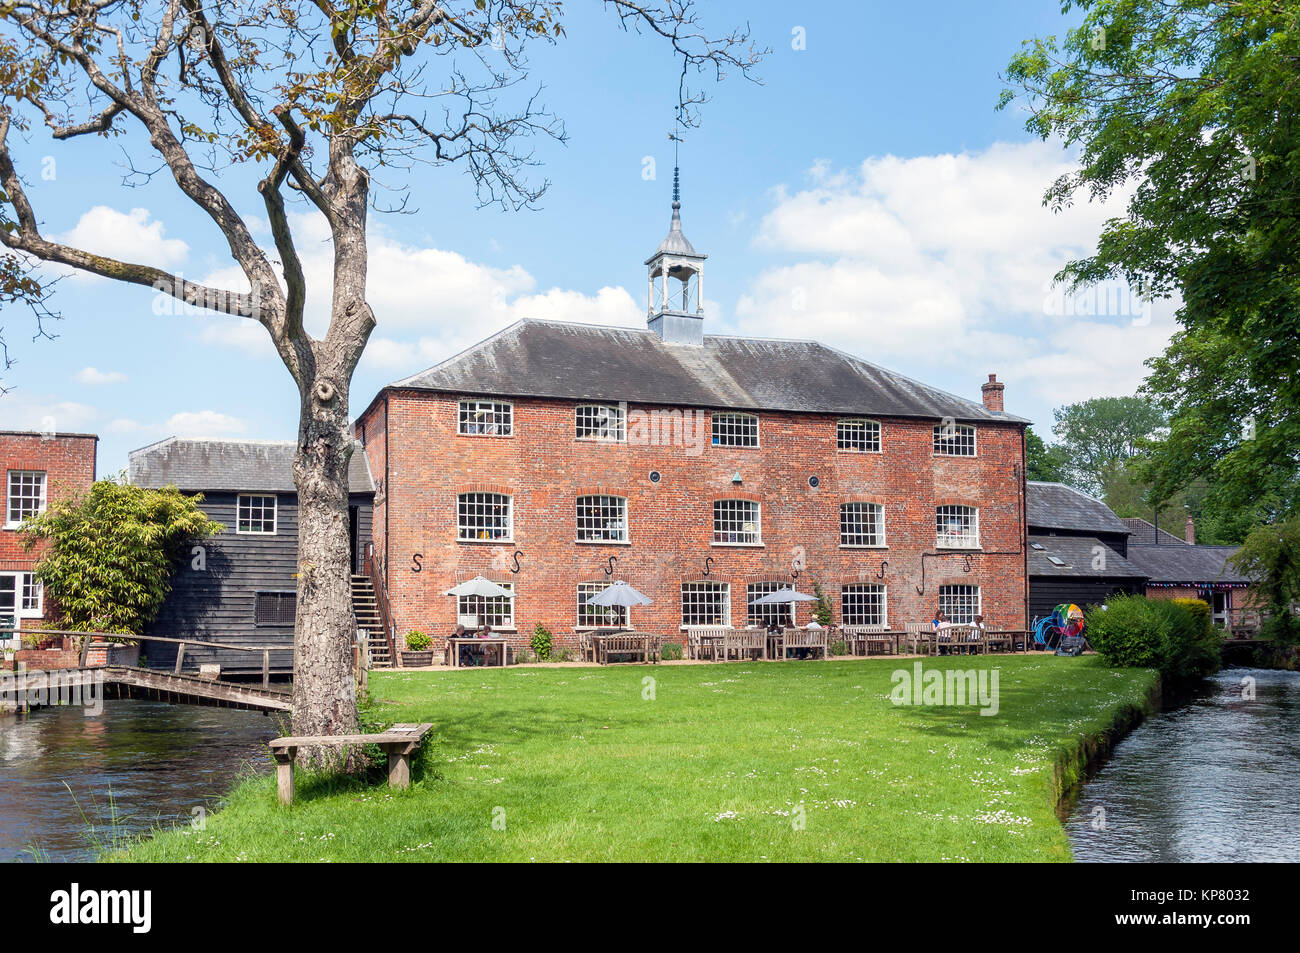 Whitchurch Silk Mill Street, Winchester, Whitchurch, Hampshire, Angleterre, Royaume-Uni Banque D'Images